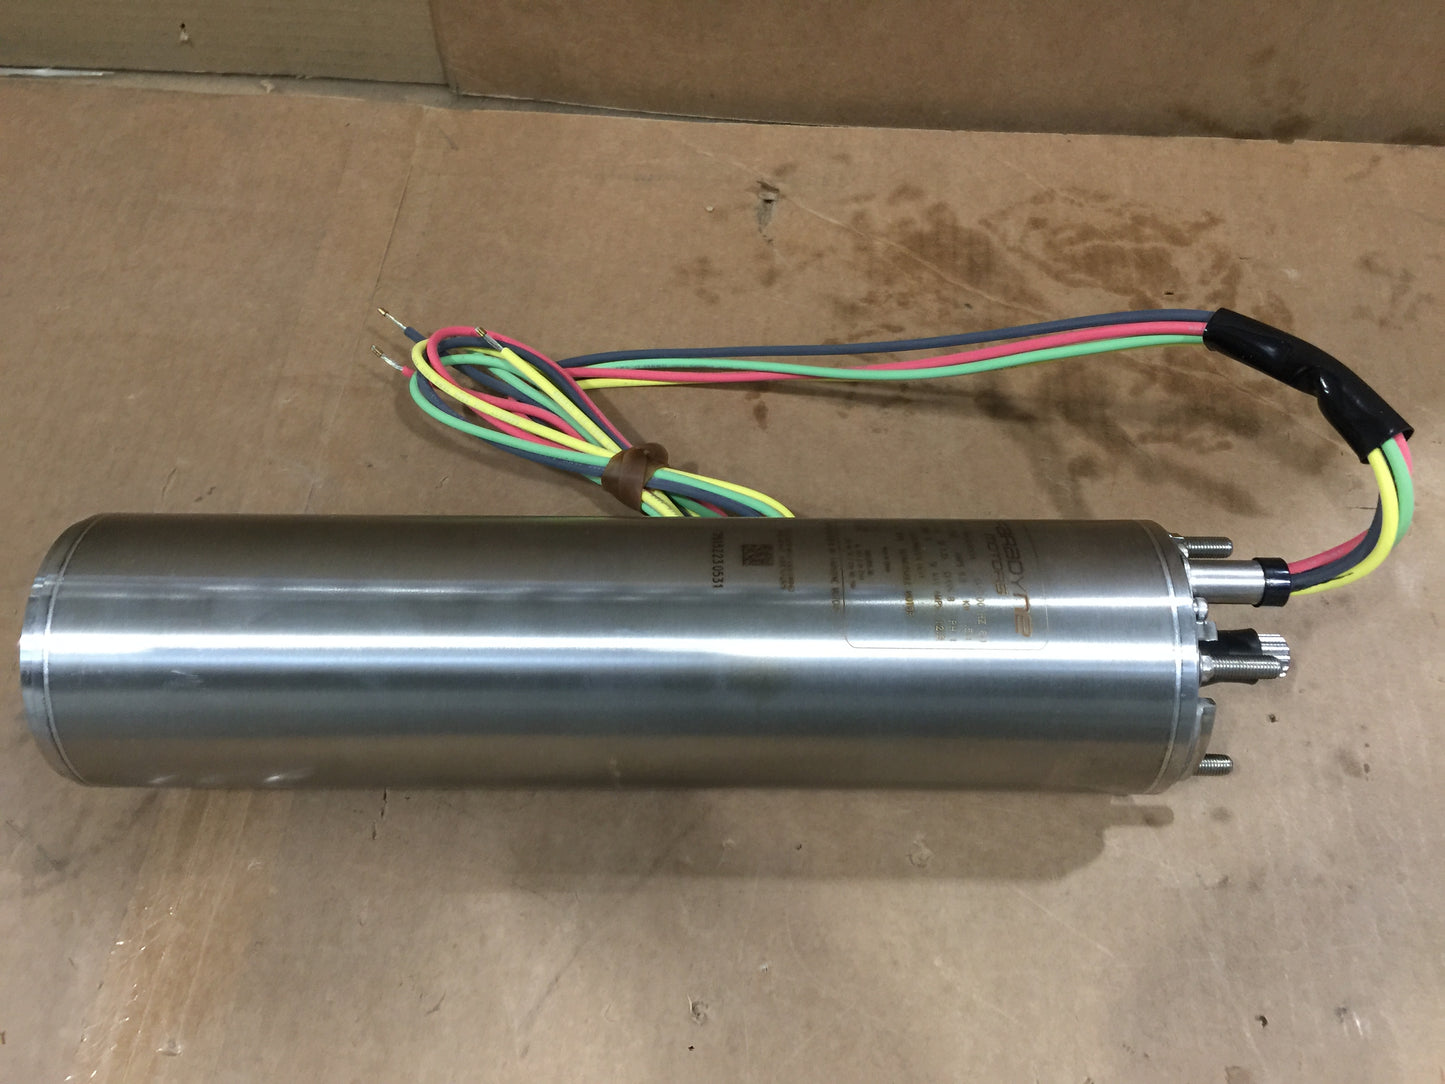 2 HP SUBMERSIBLE ELECTRIC PUMP MOTOR; 230/60/1, RPM 3450, 9.9 AMPS, 1.50 KW